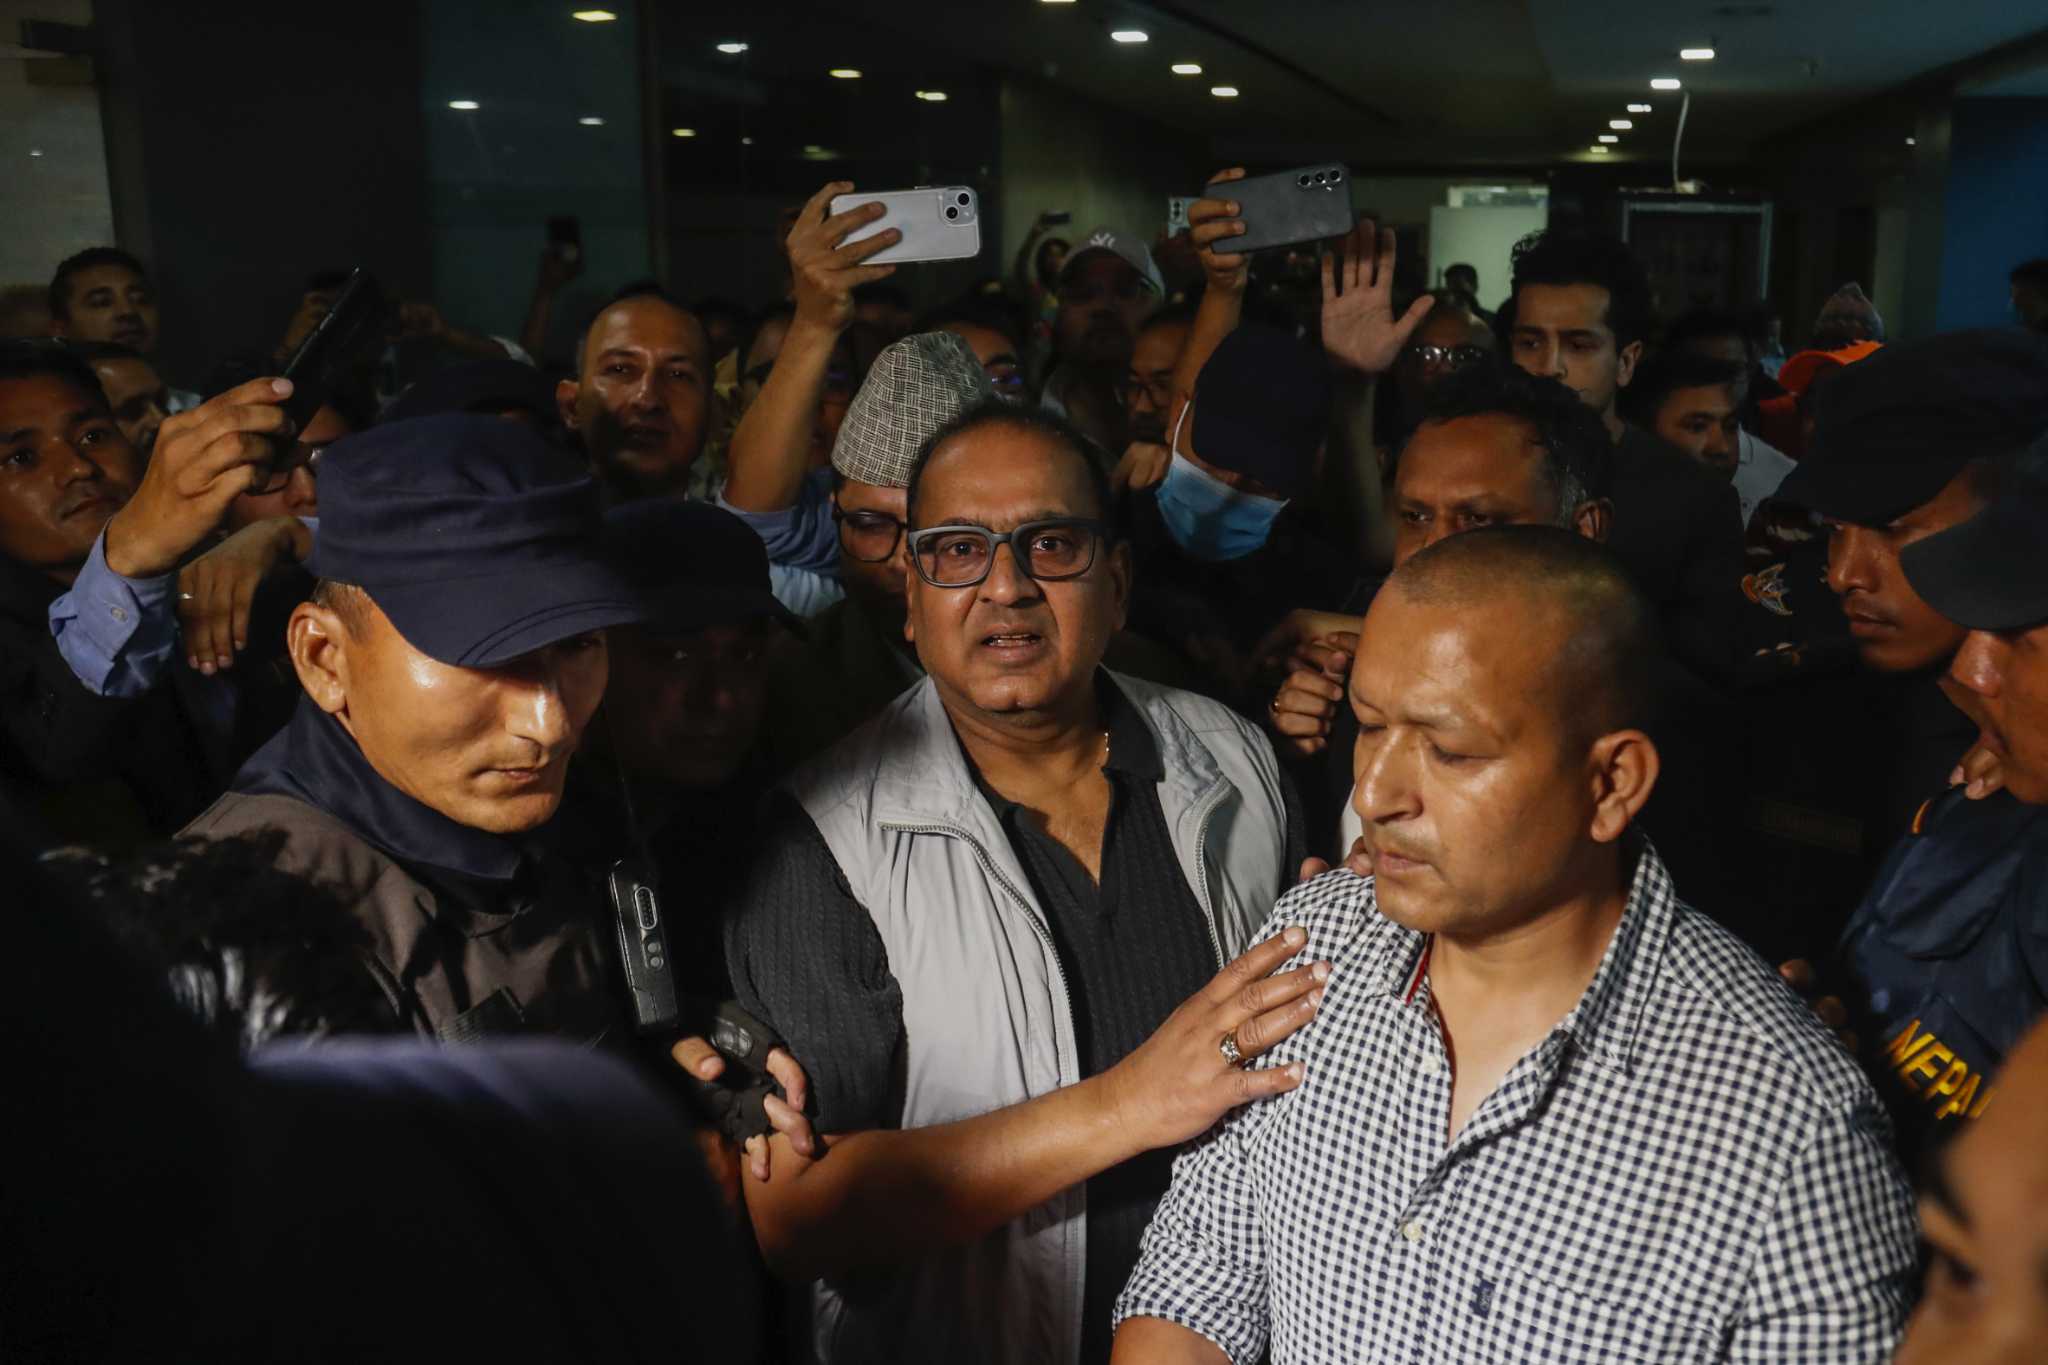 Owner of Nepal's largest media organization arrested over citizenship card issue